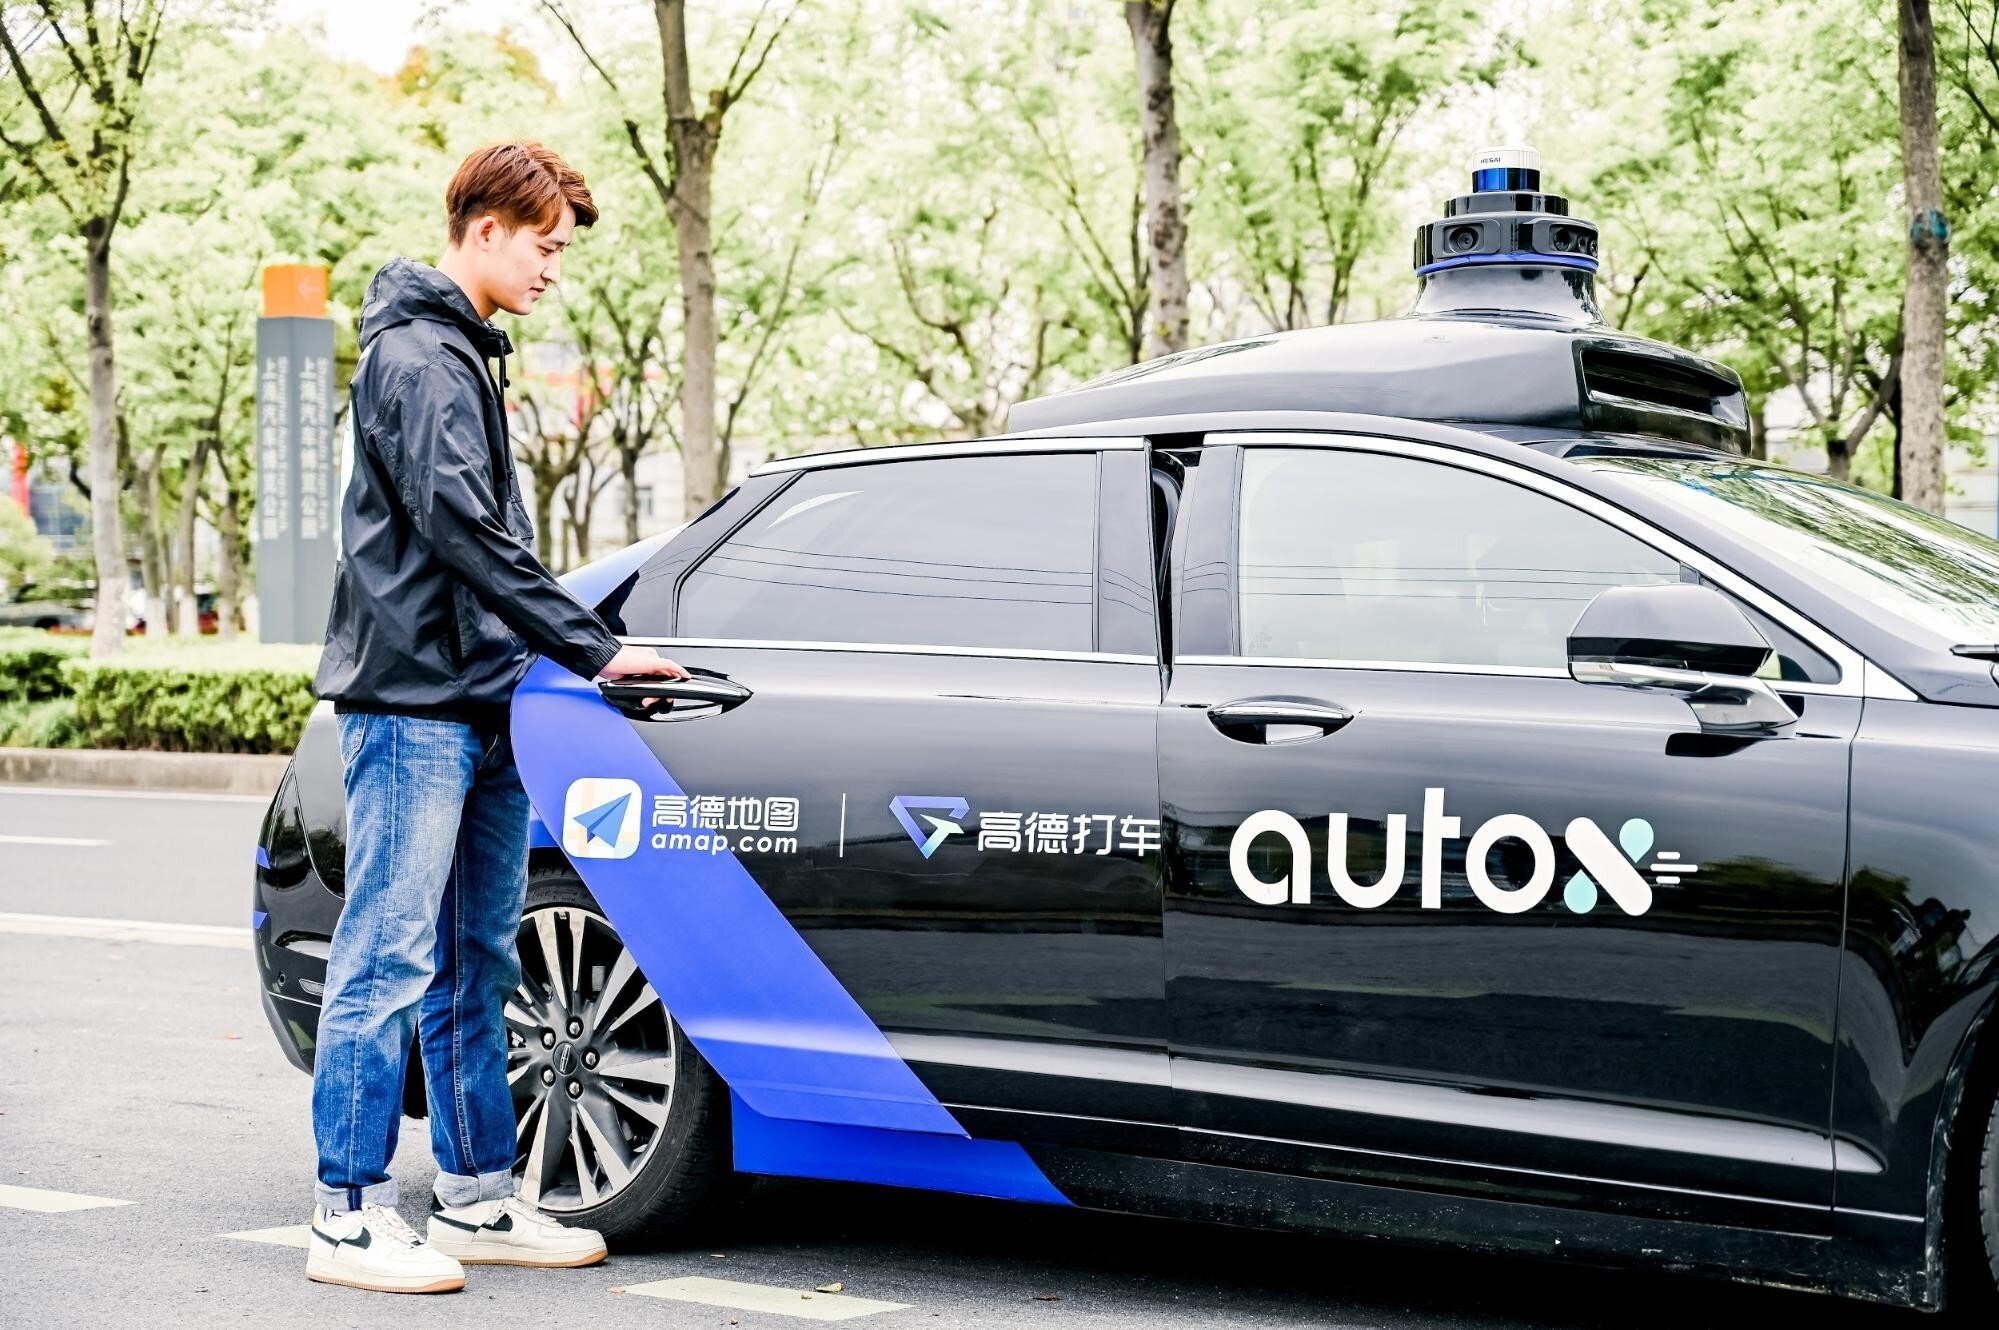 The AutoX RoboTaxi service in Shanghai’s Jiading district marks the first time an option for a self-driving car has become available on a major ride-hailing platform in China. Photo: Handout